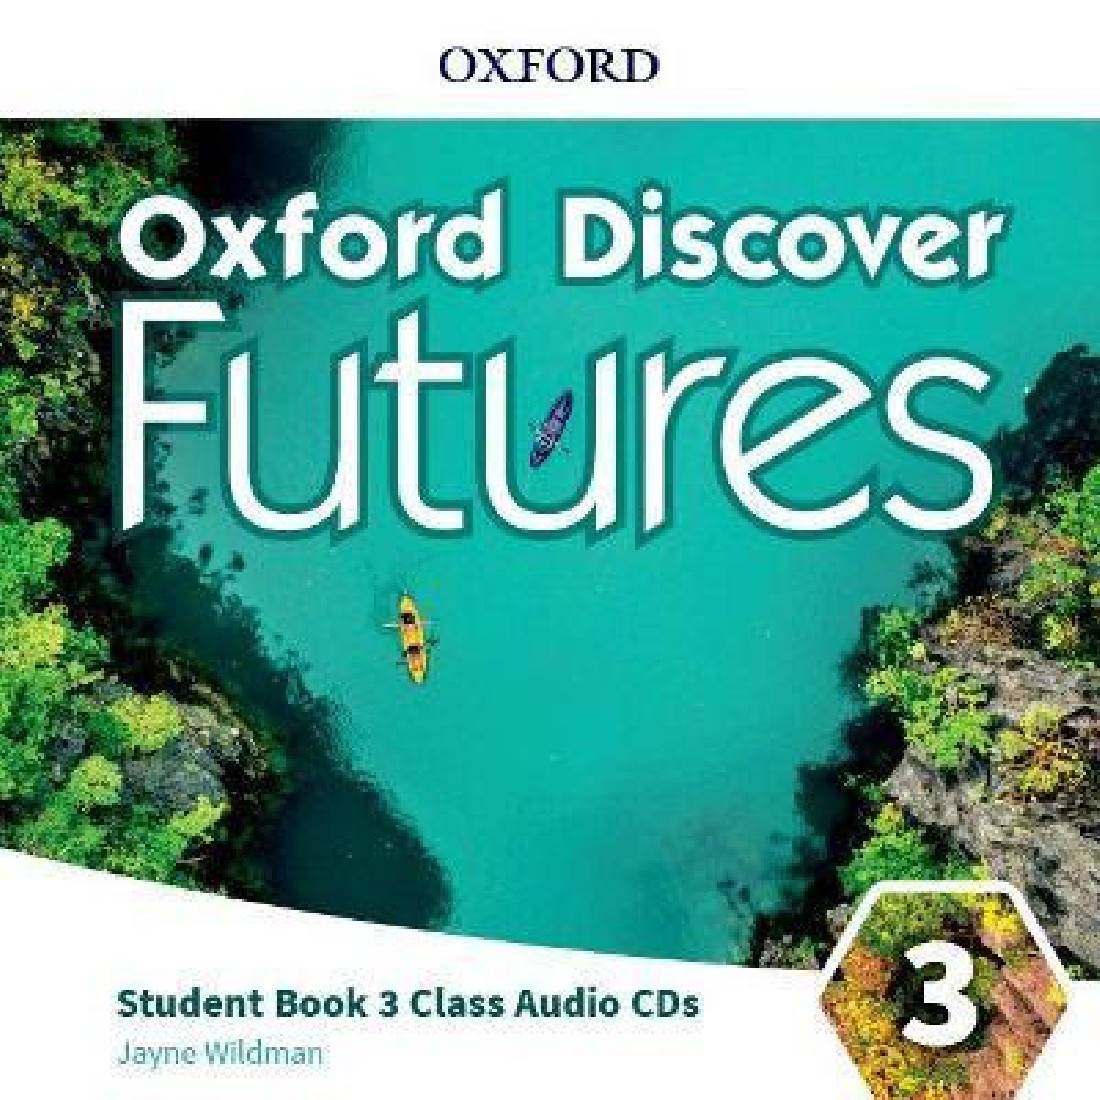 OXFORD DISCOVER FUTURES 3 CD CLASS